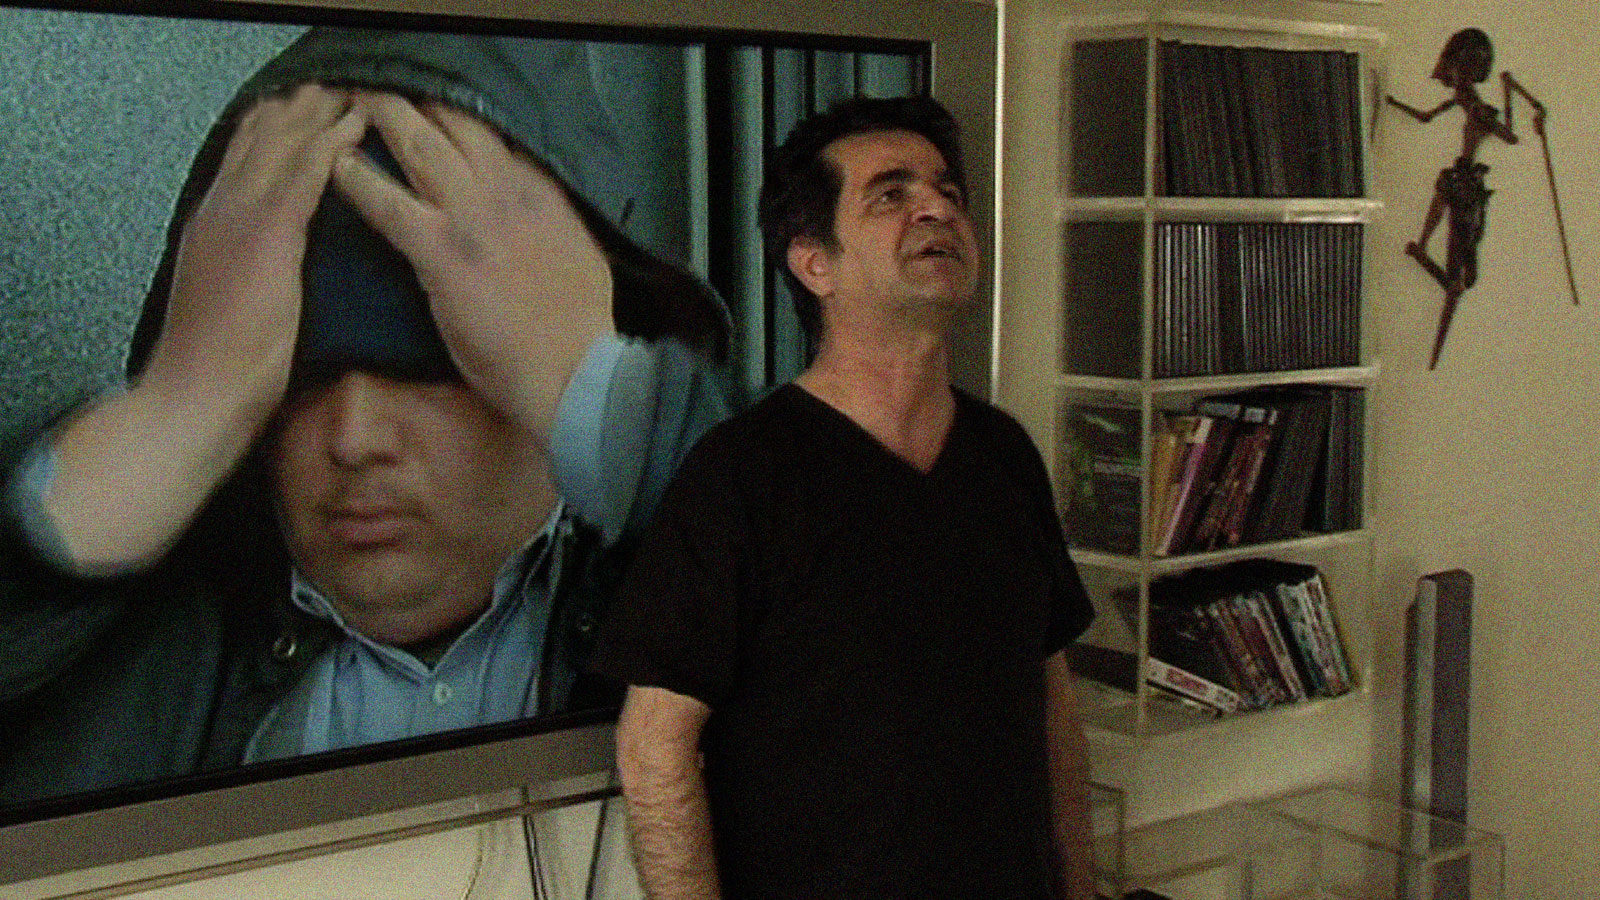 Jafar Panahi looks up as his film Crimson Gold plays in the background in This is Not a Film